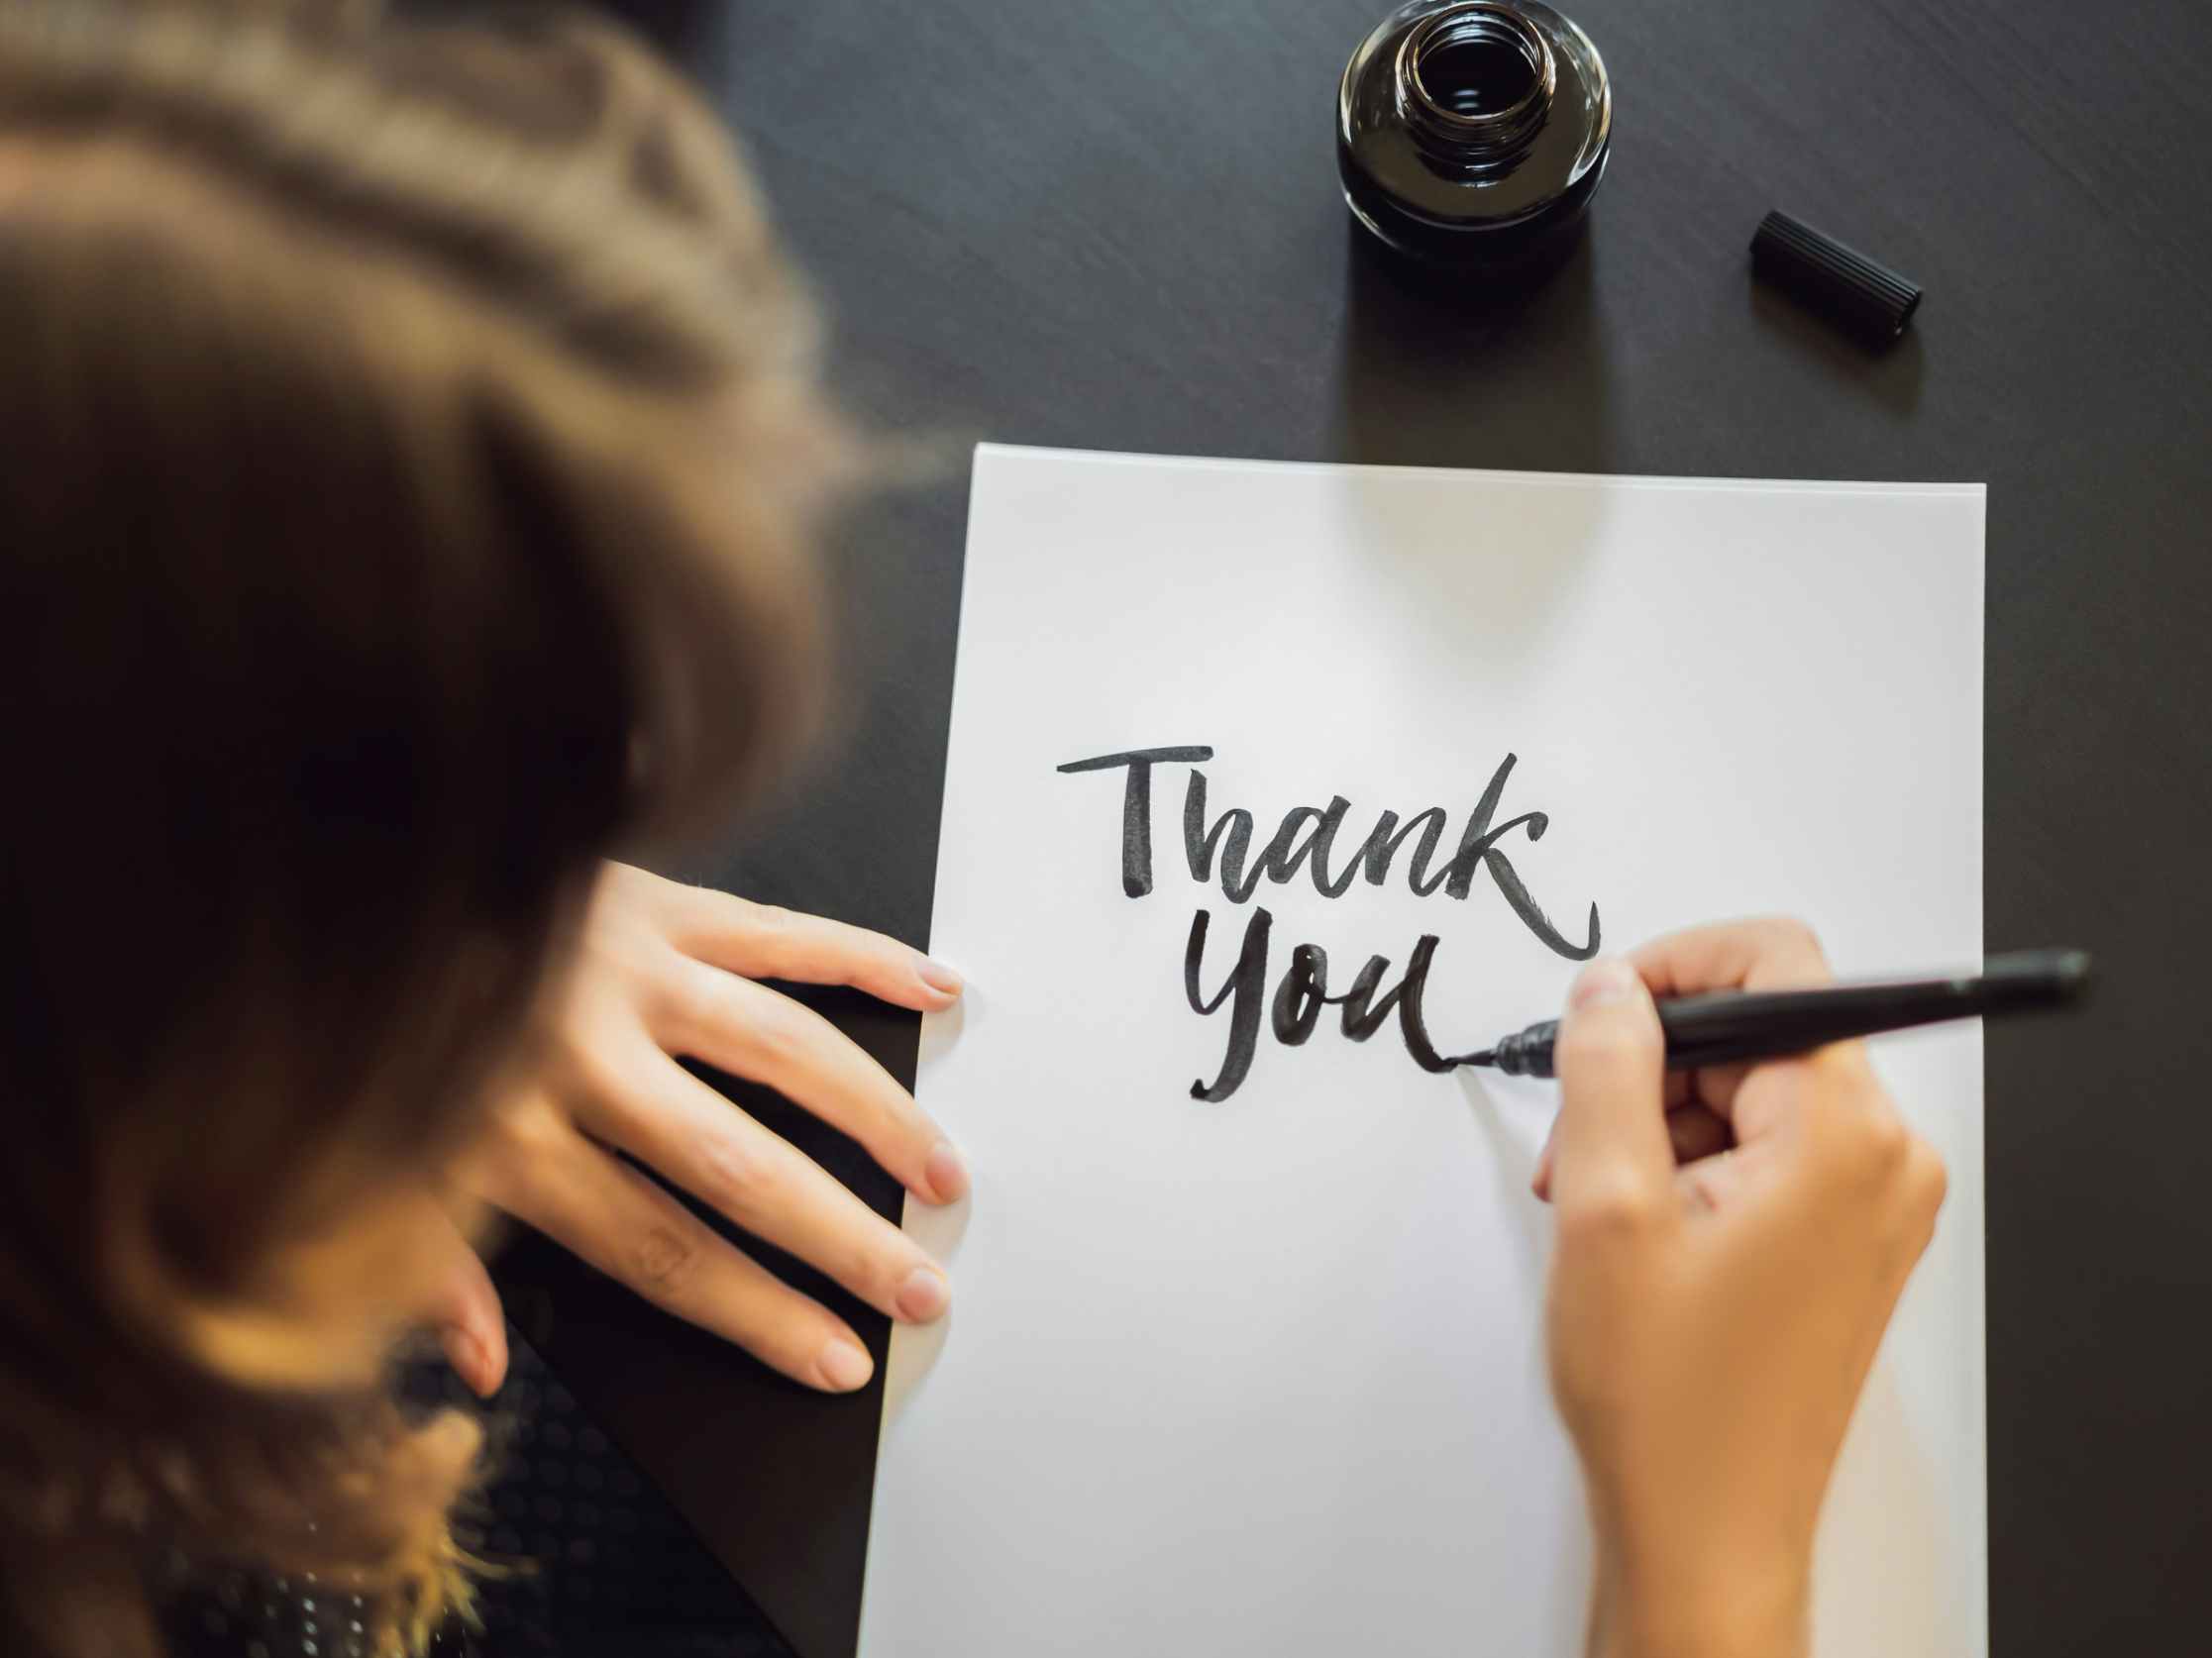 Someone writing "thank you" on a piece of paper in calligraphy